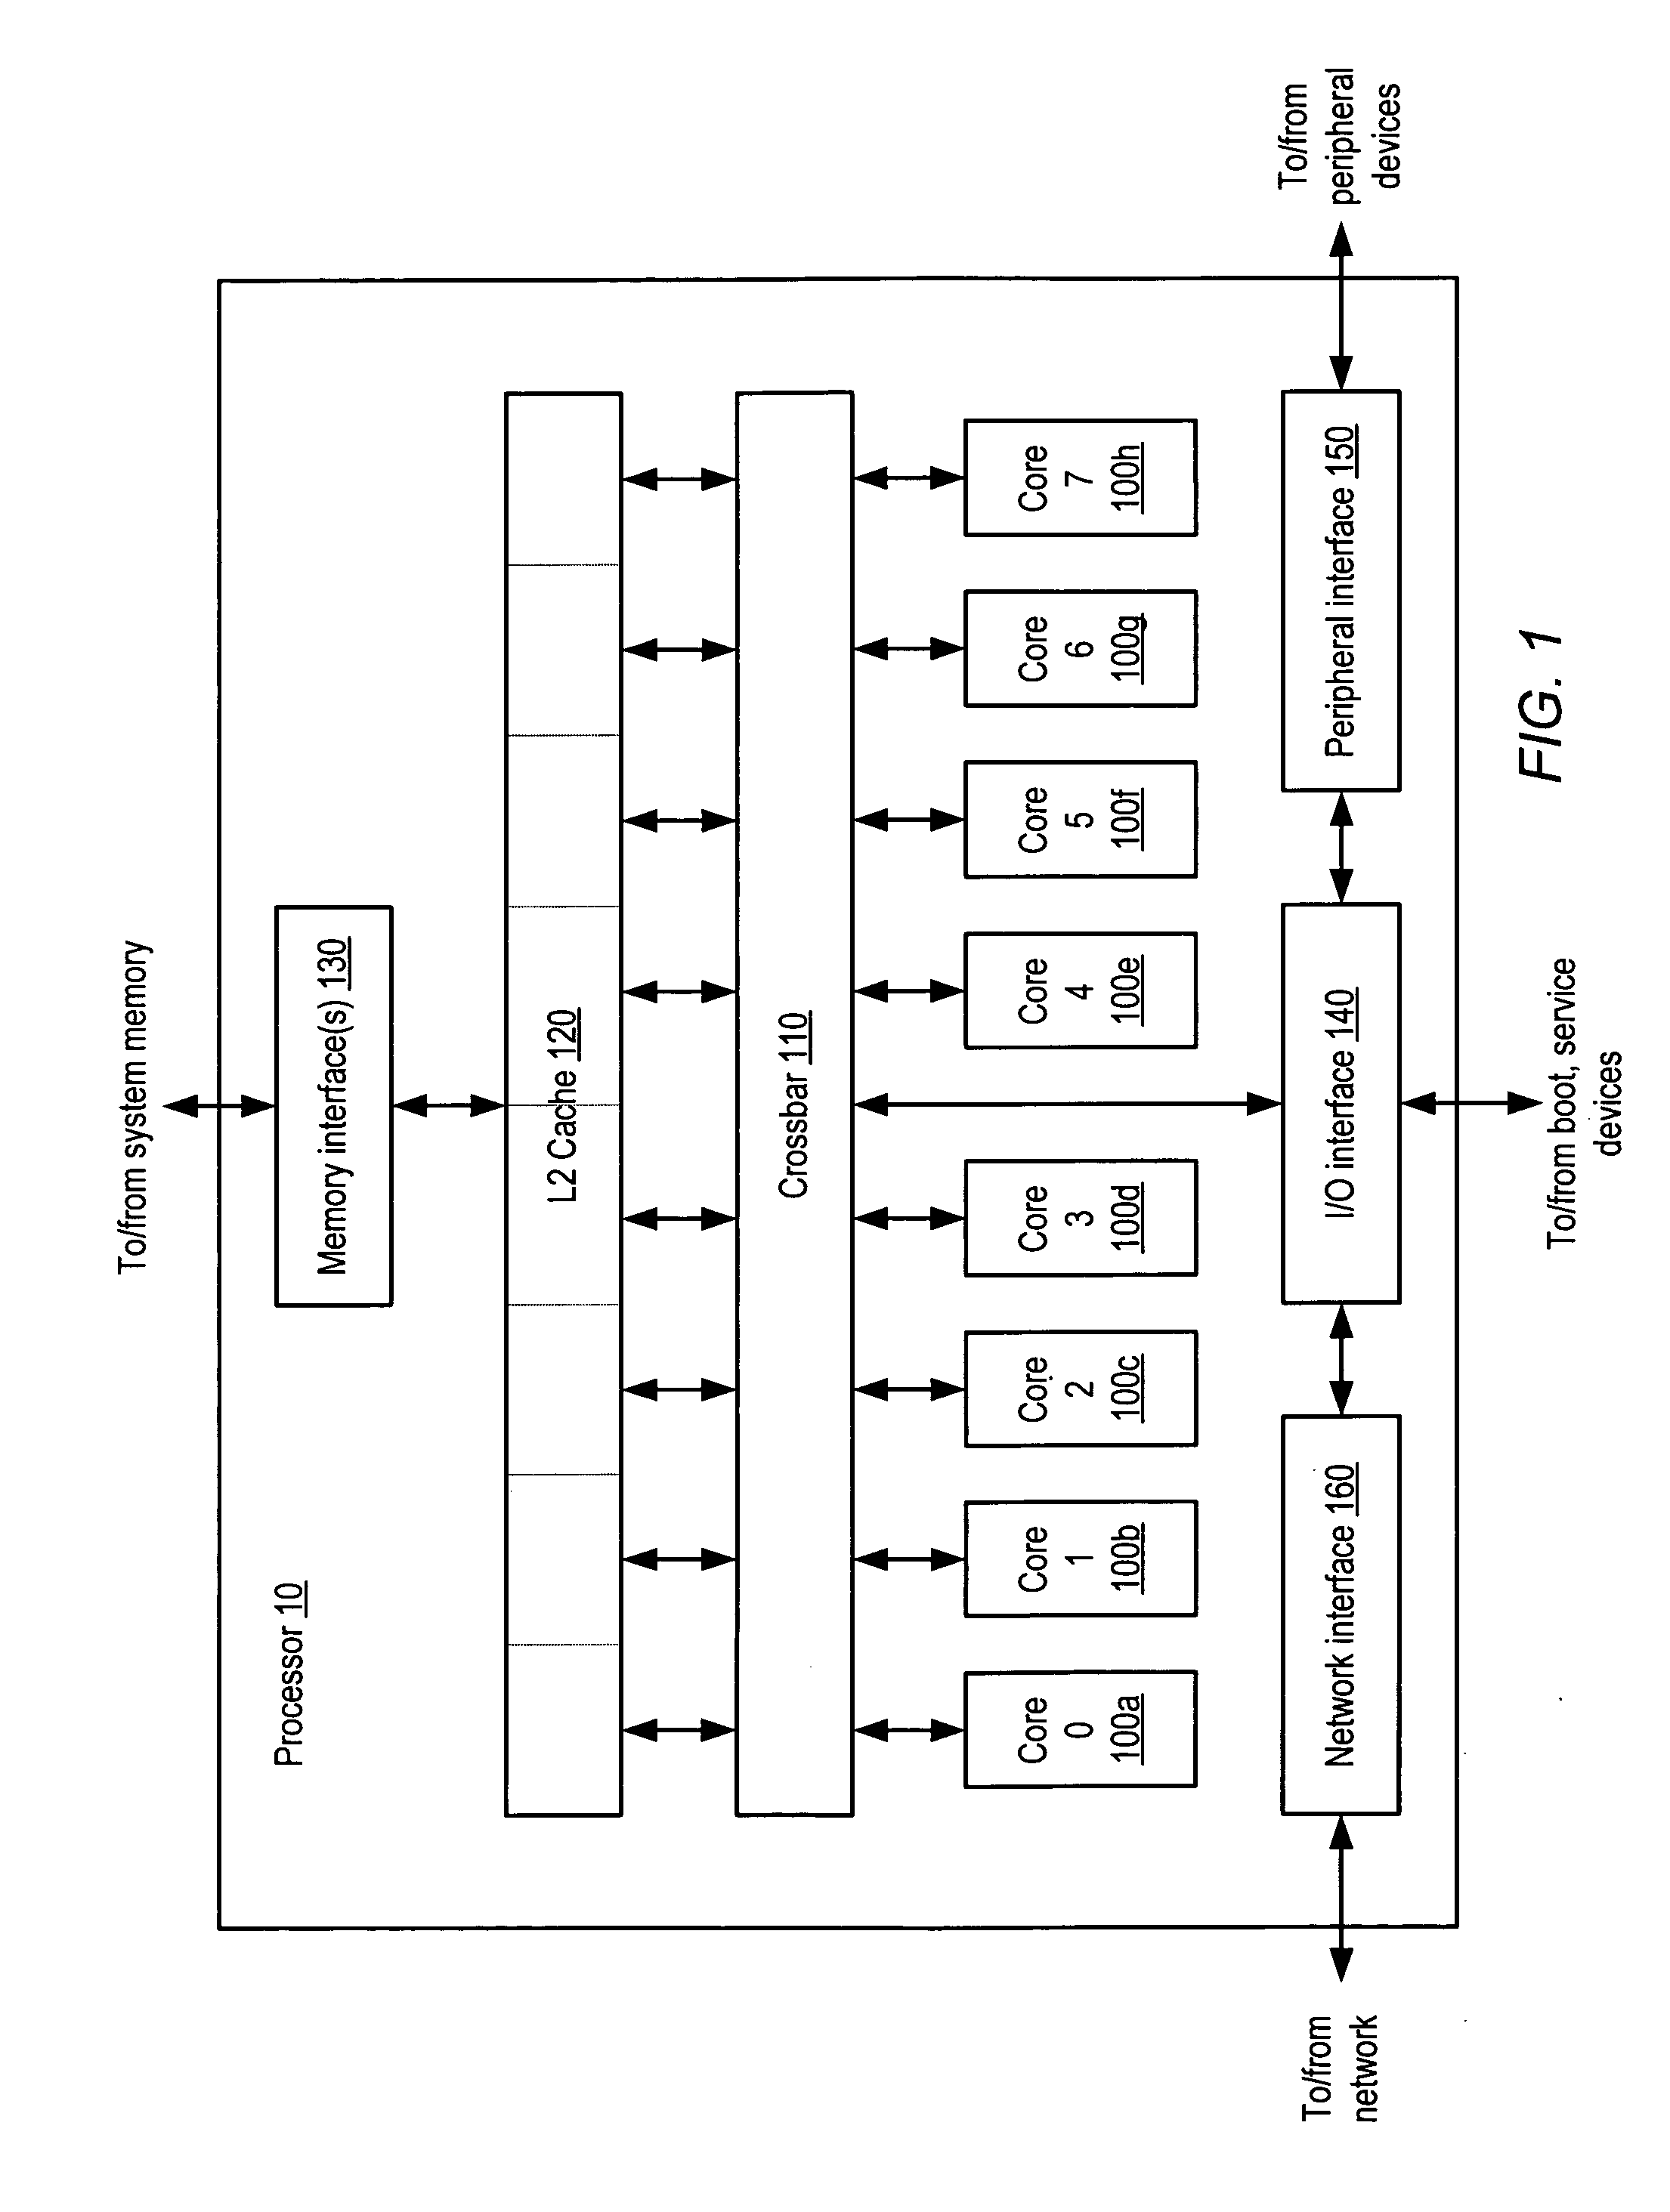 Apparatus and method for fine-grained multithreading in a multipipelined processor core